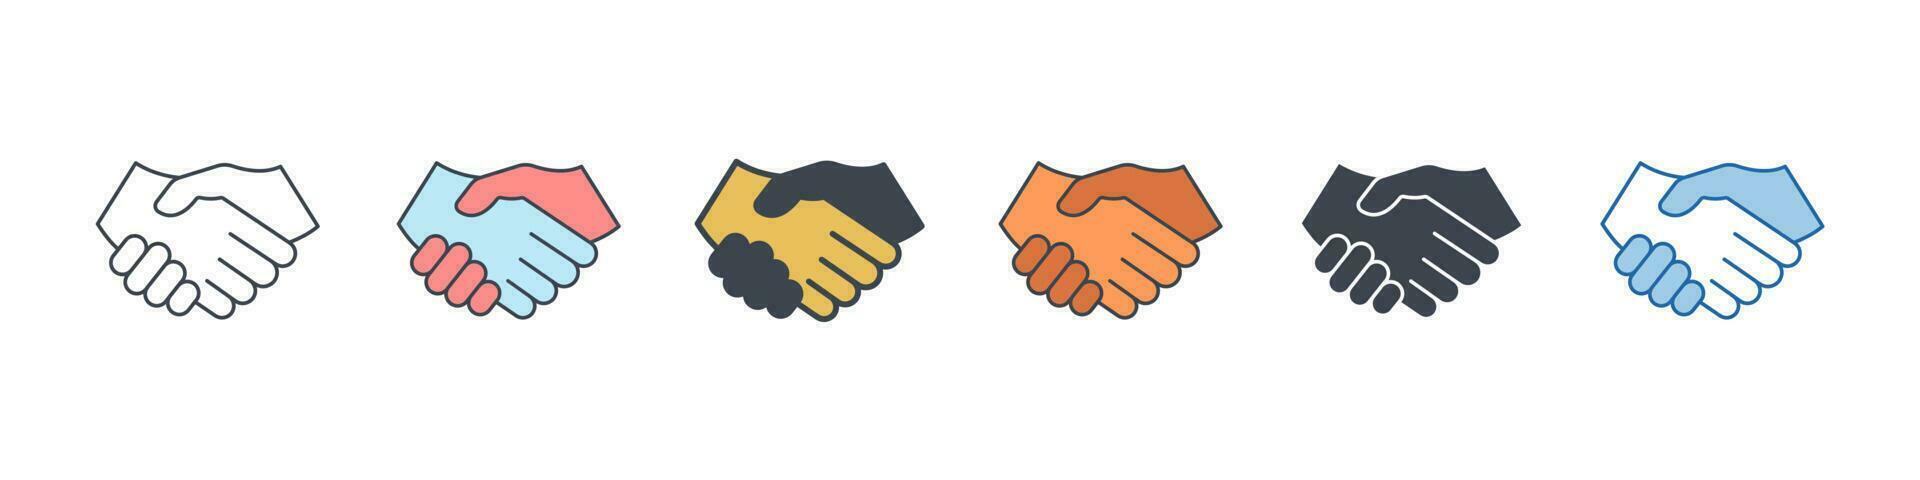 Handshake icon symbol template for graphic and web design collection logo vector illustration